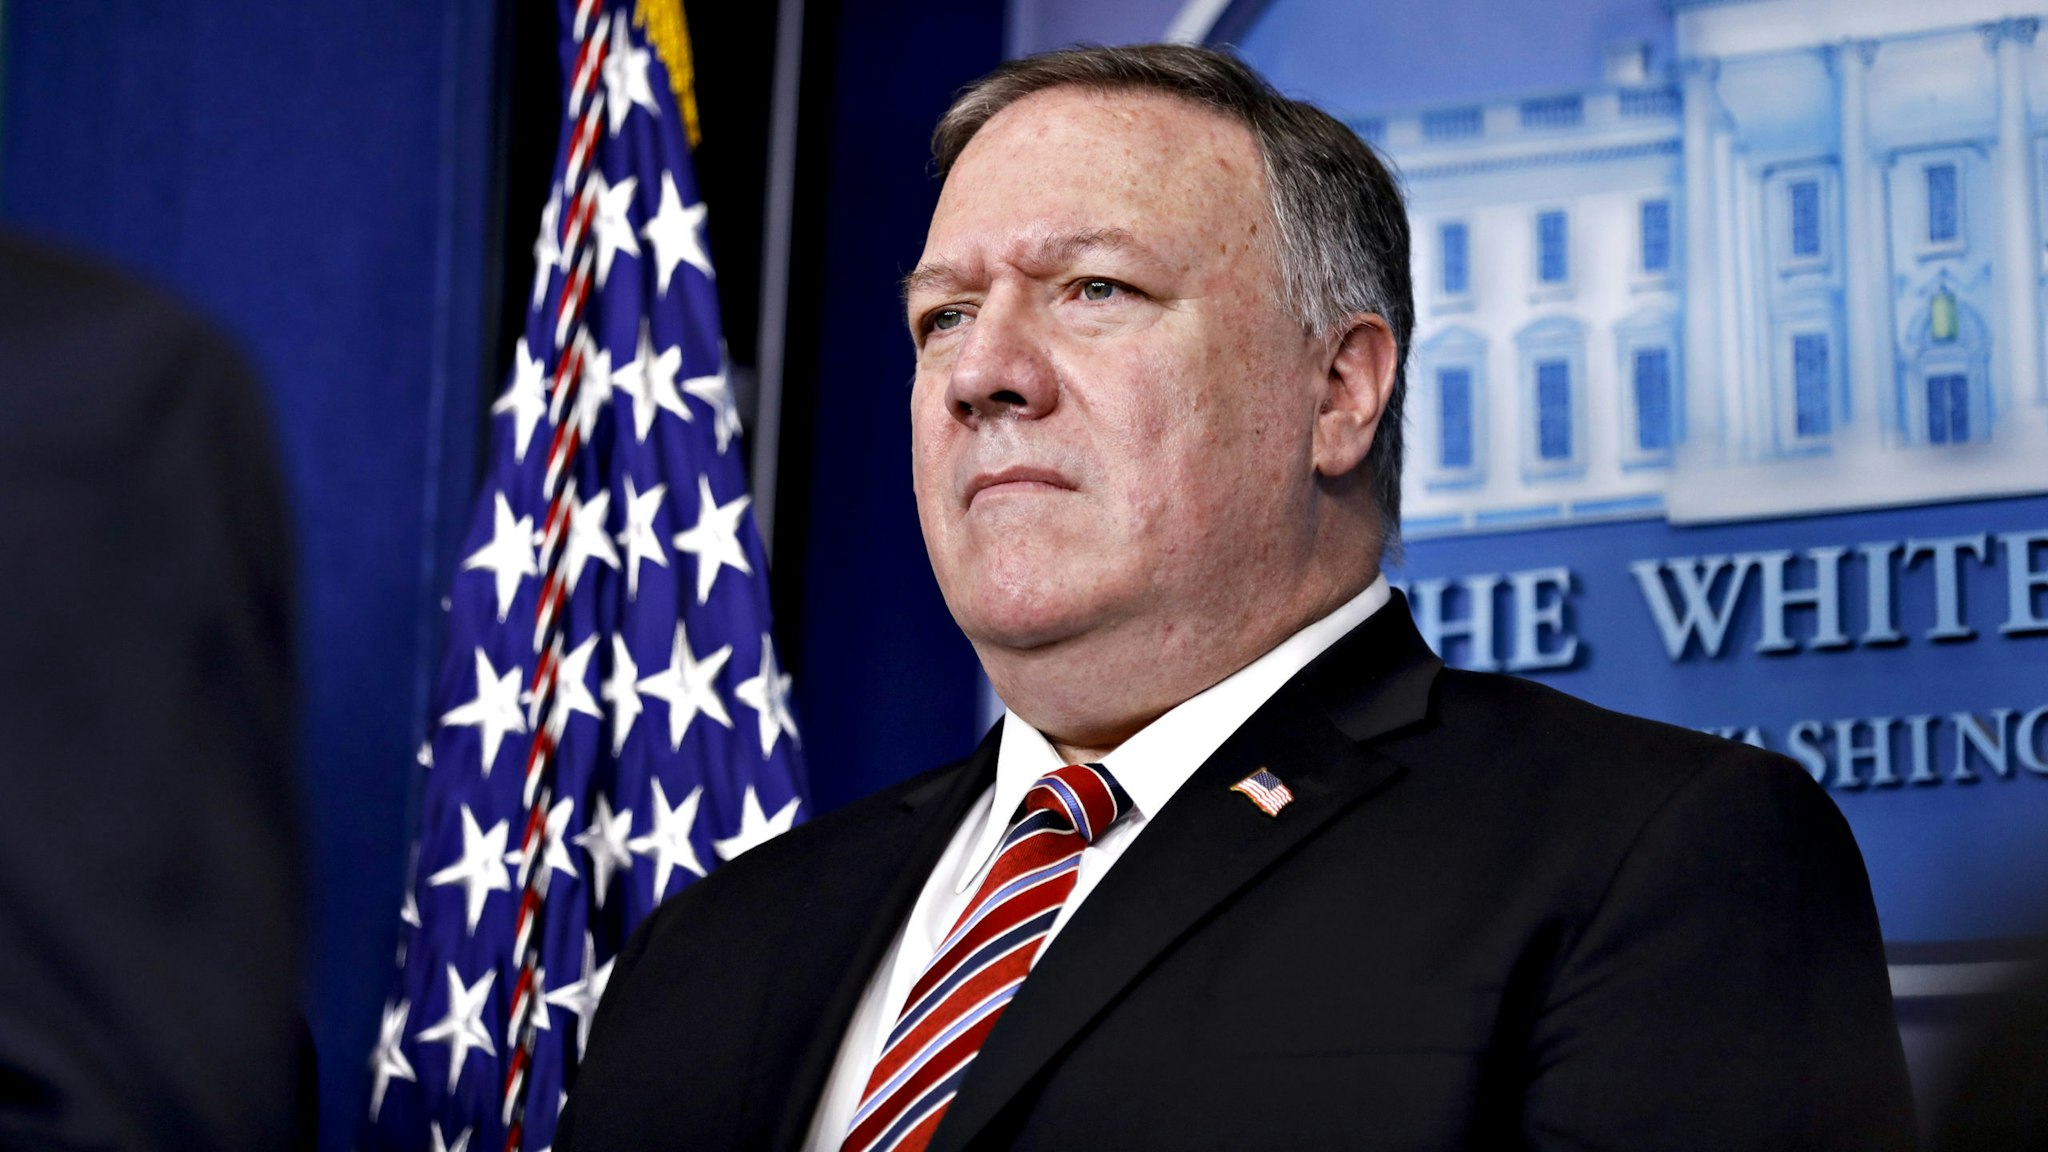 Mike Pompeo, U.S. secretary of state, listens during a Coronavirus Task Force news conference in the briefing room of the White House in Washington, D.C., U.S., on Friday, March 20, 2020. Americans will have to practice social distancing for at least several more weeks to mitigate U.S. cases of Covid-19, Anthony S. Fauci of the National Institutes of Health said today.